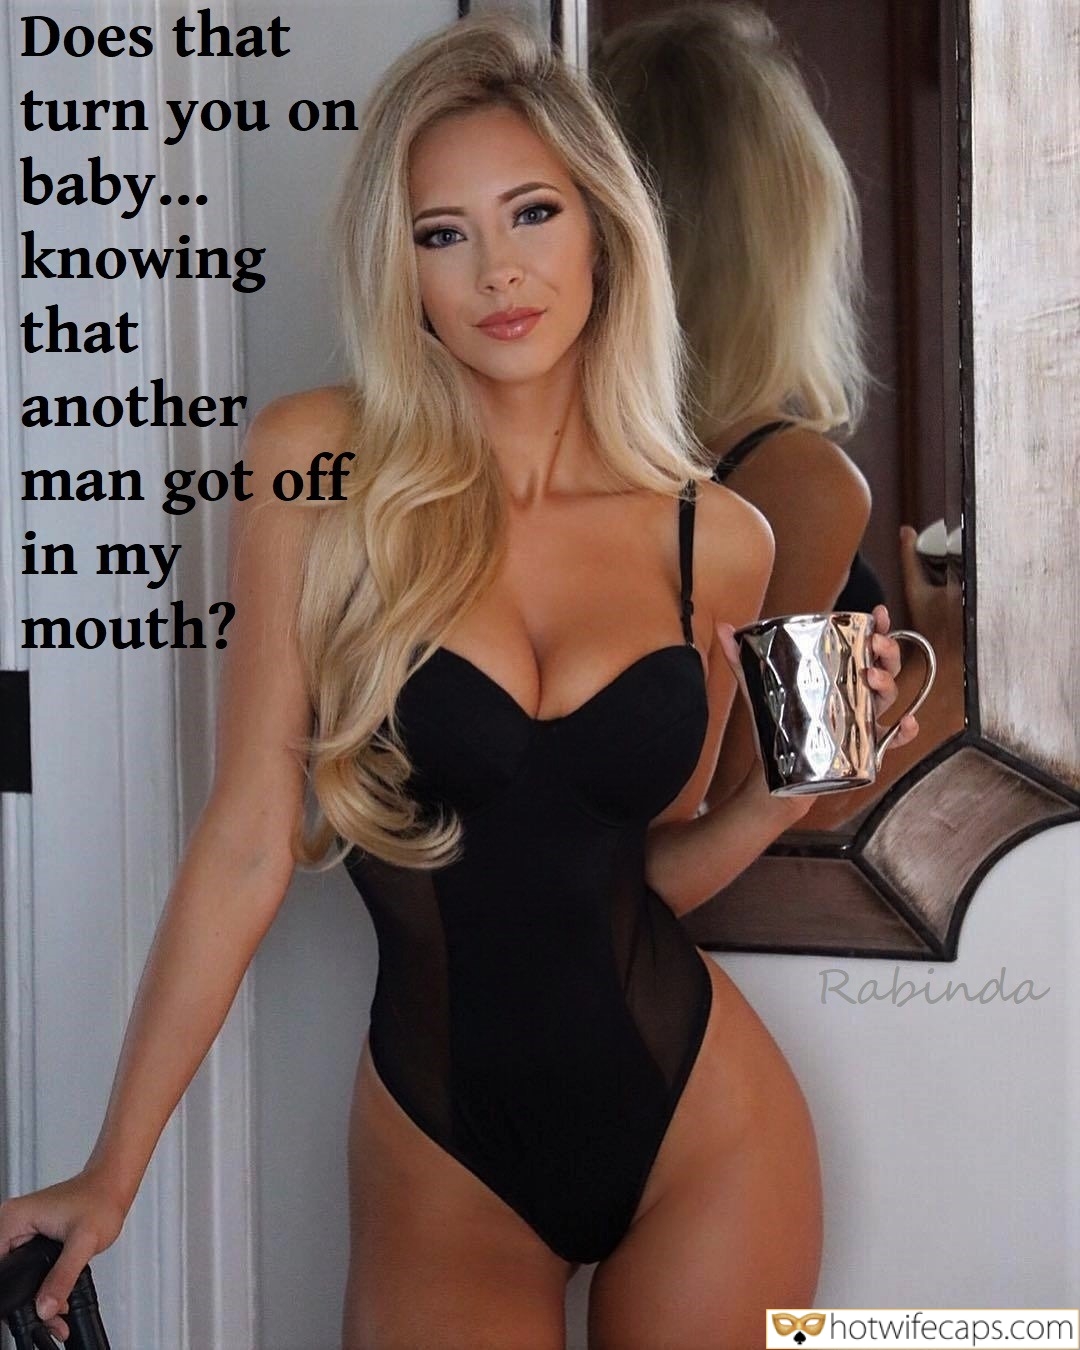 Hotwife and Cuckold Captions on X pic image